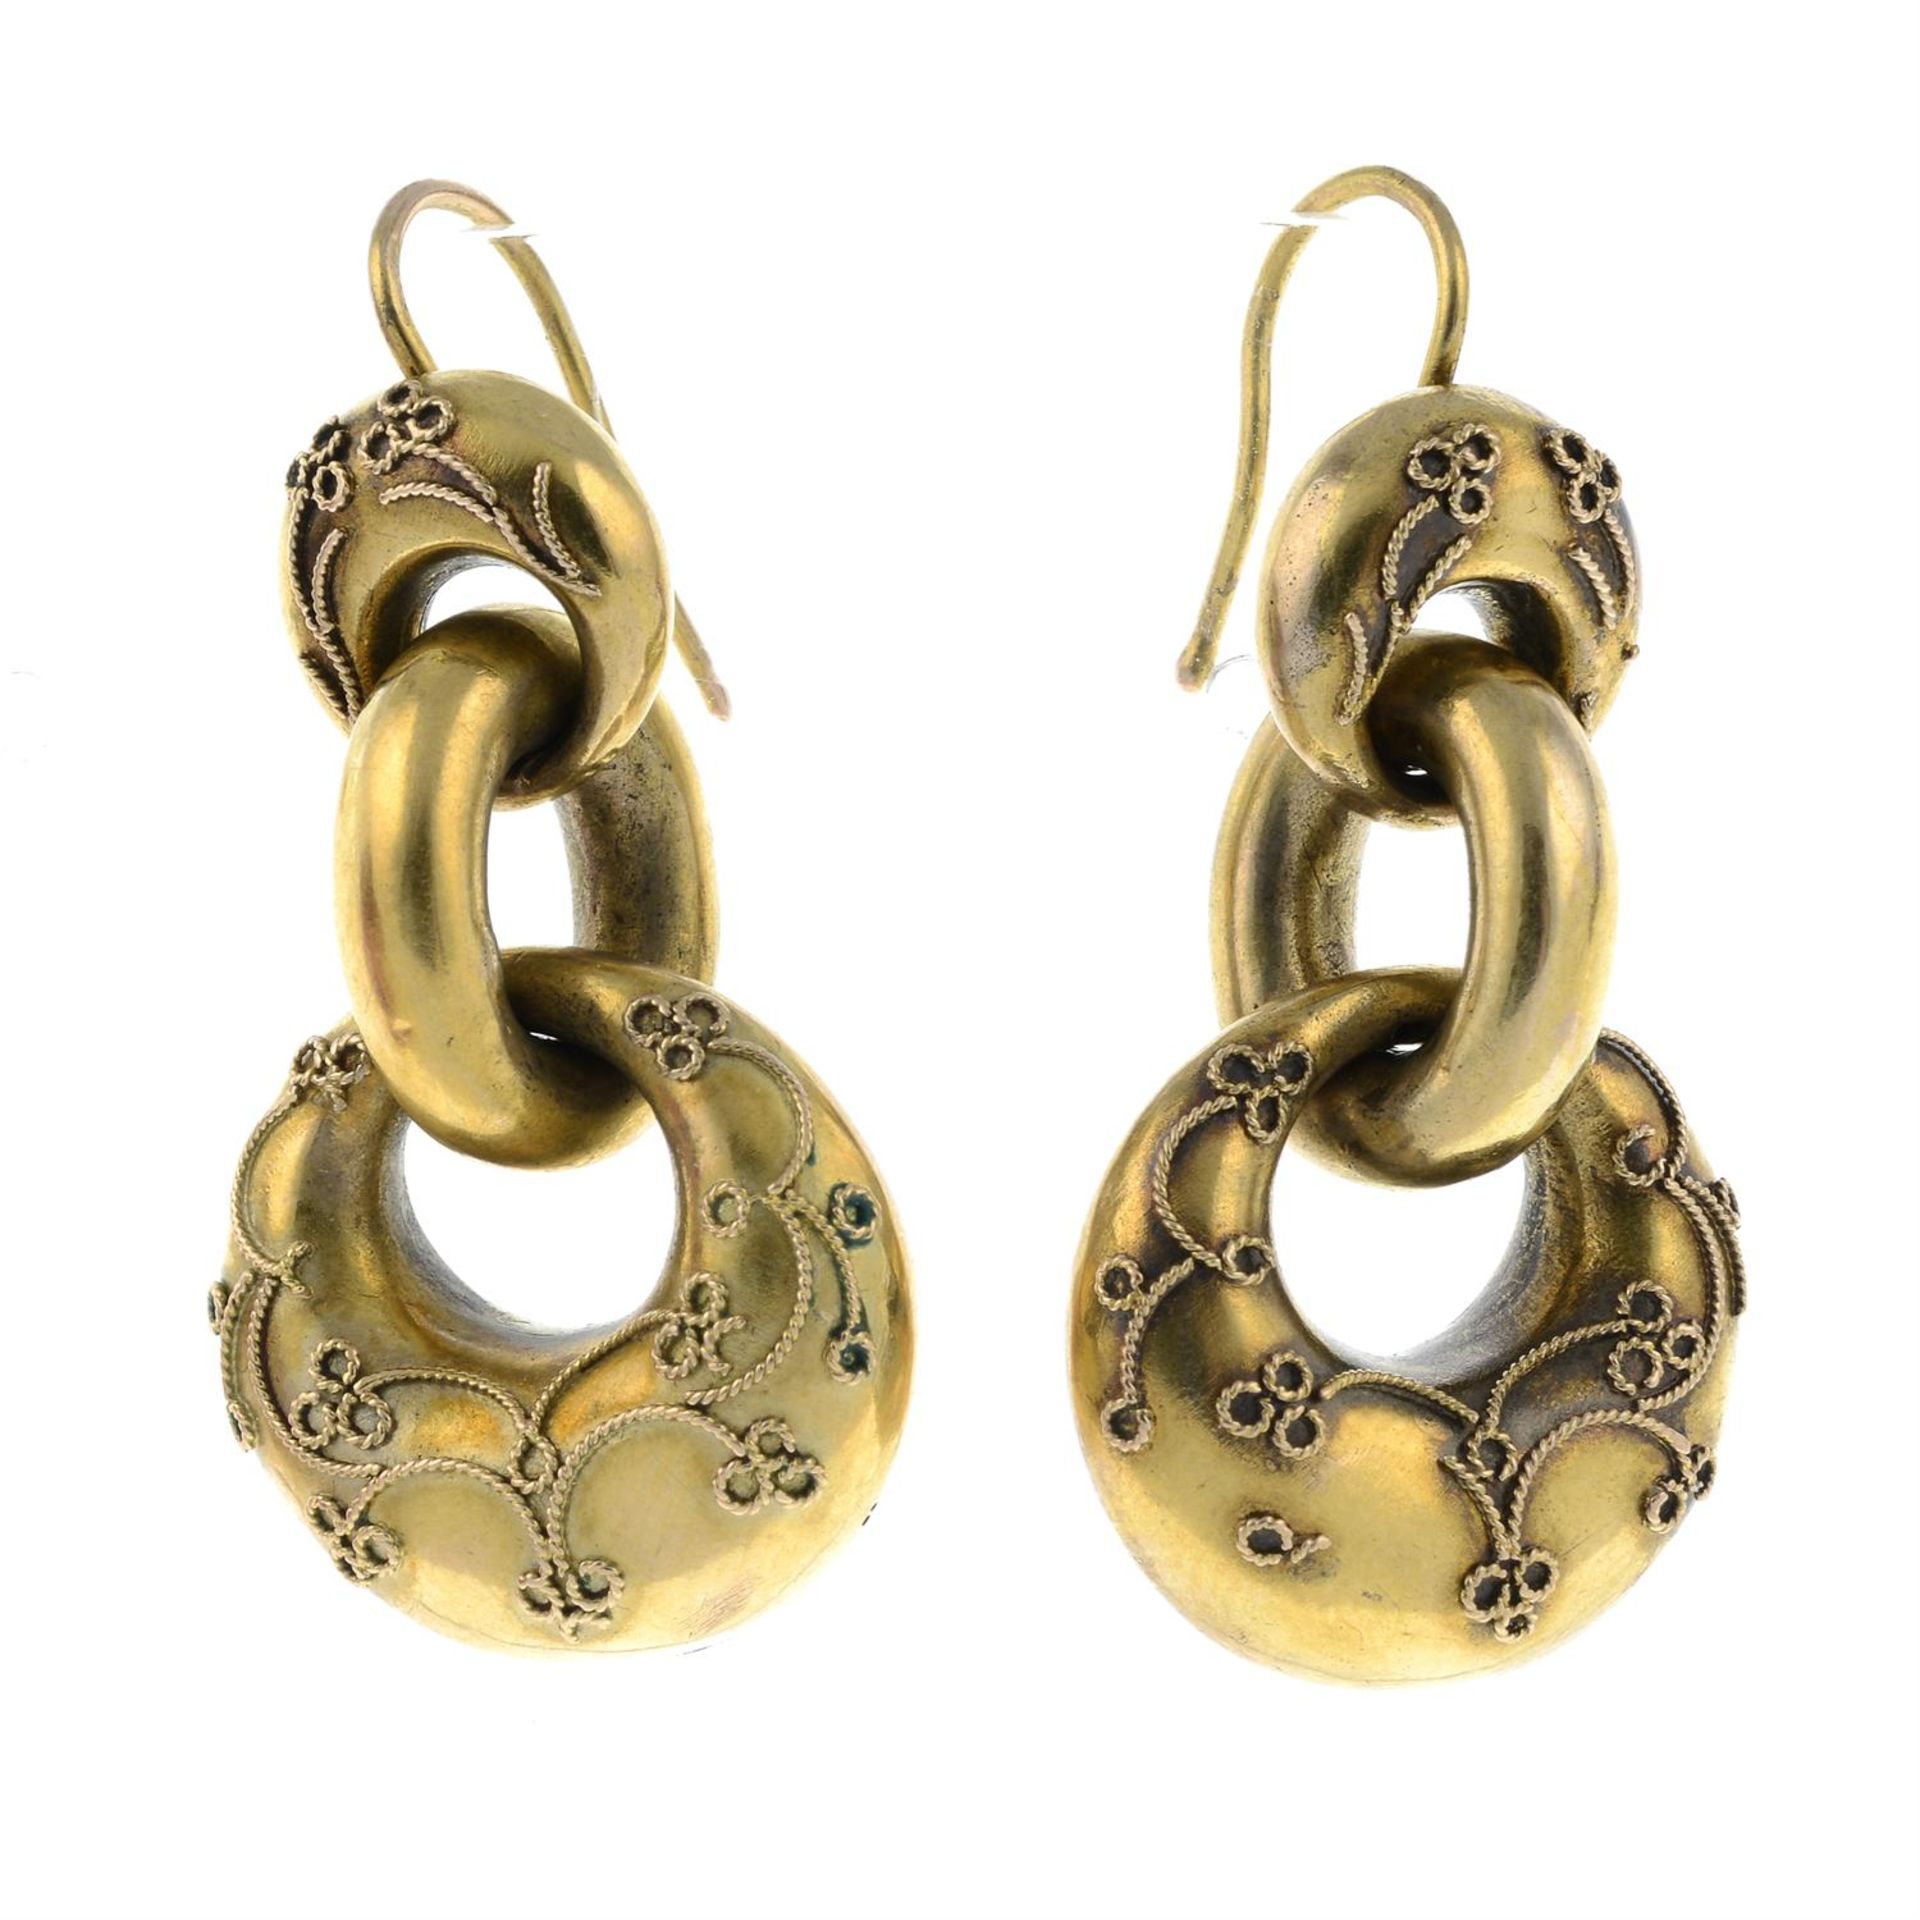 A pair of mid to late 19th century circular floral motif drop earrings.